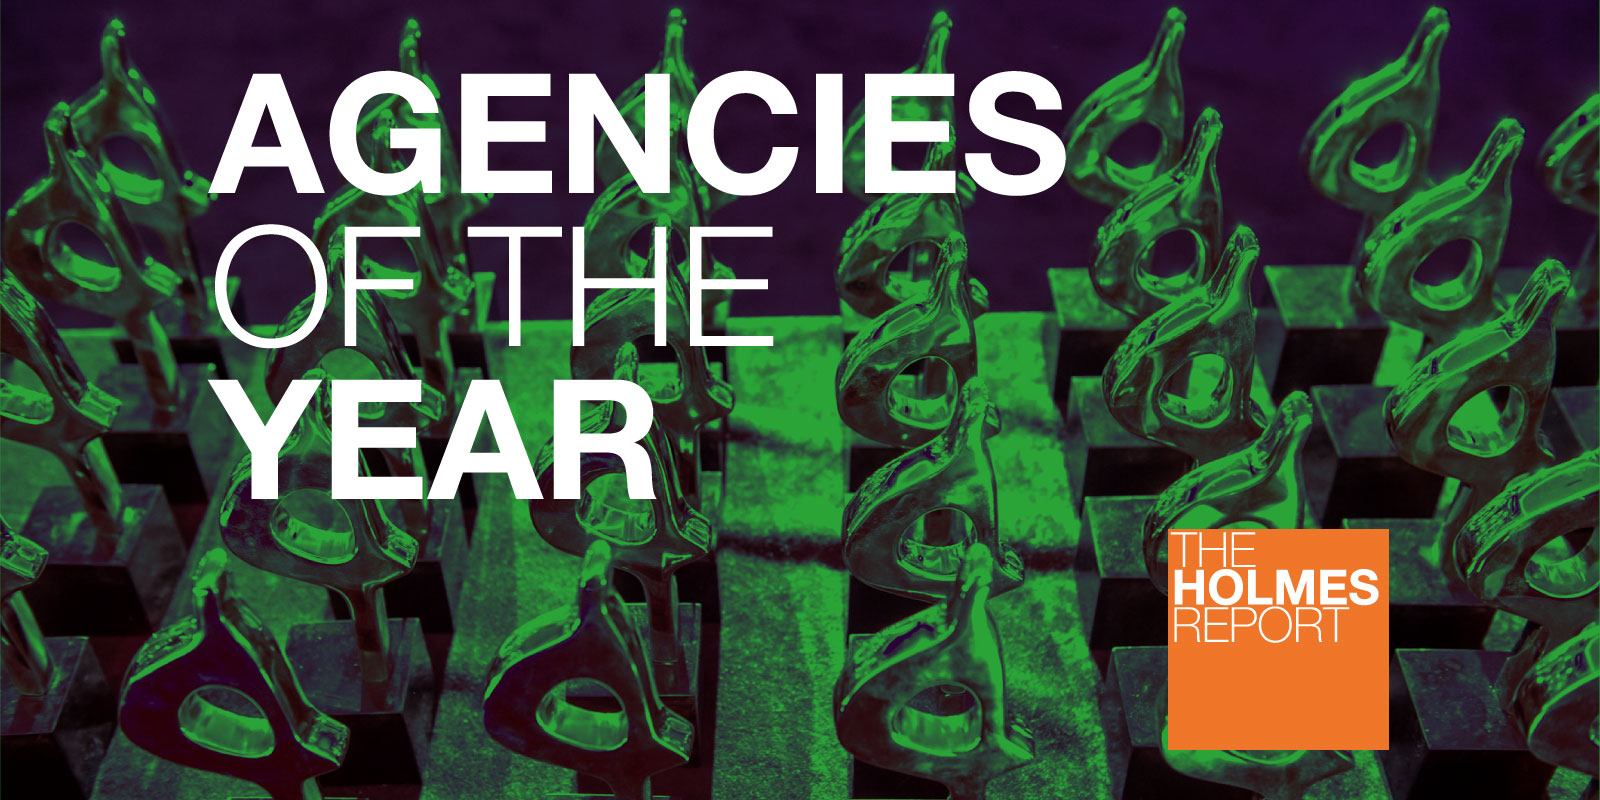 Holmes Report Agencies of the Year